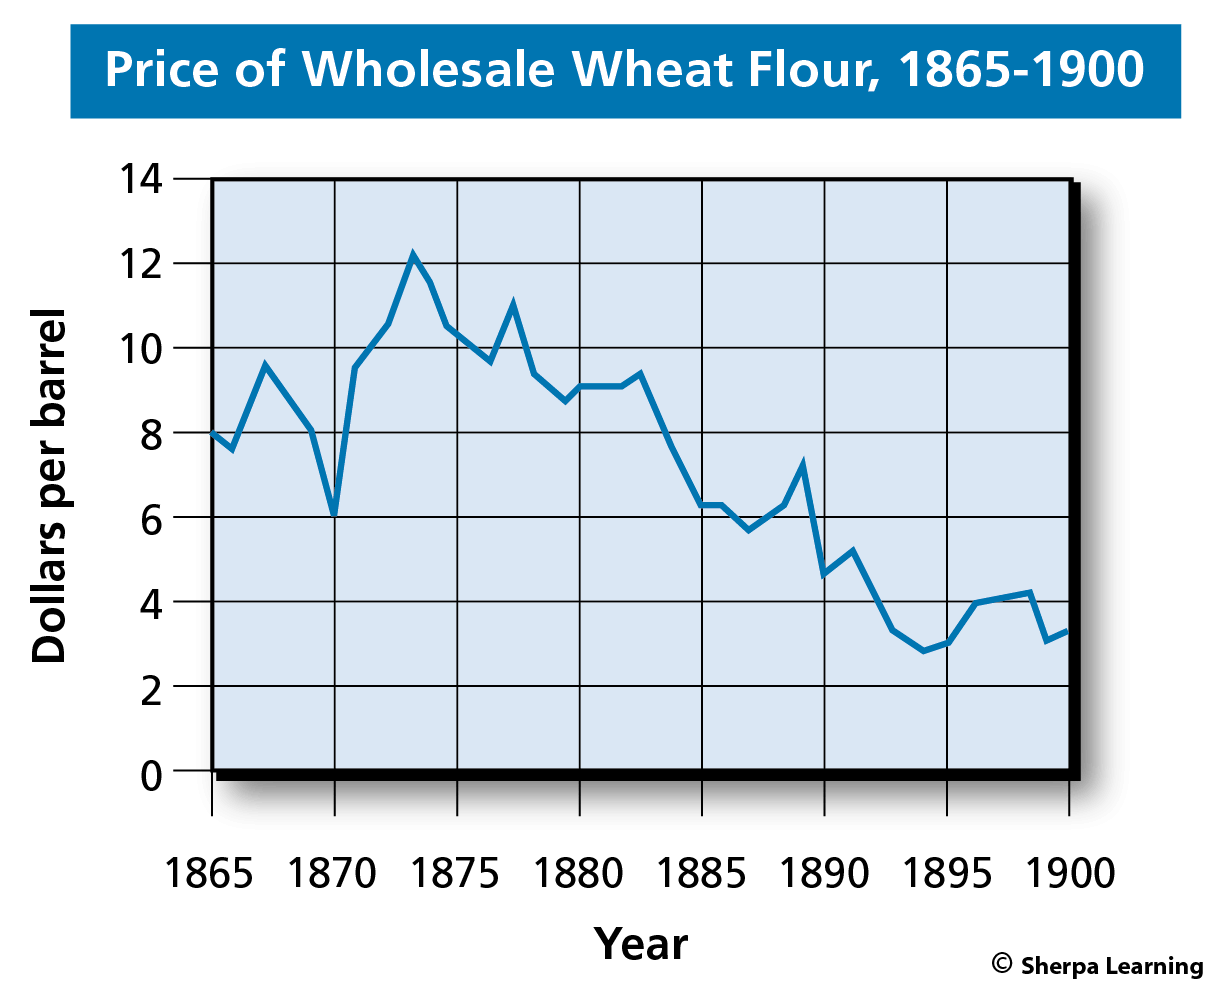 Skillbook Visual Source Exercise #9 - Graph: Price of Wholesale Wheat Flour, 1865-1900